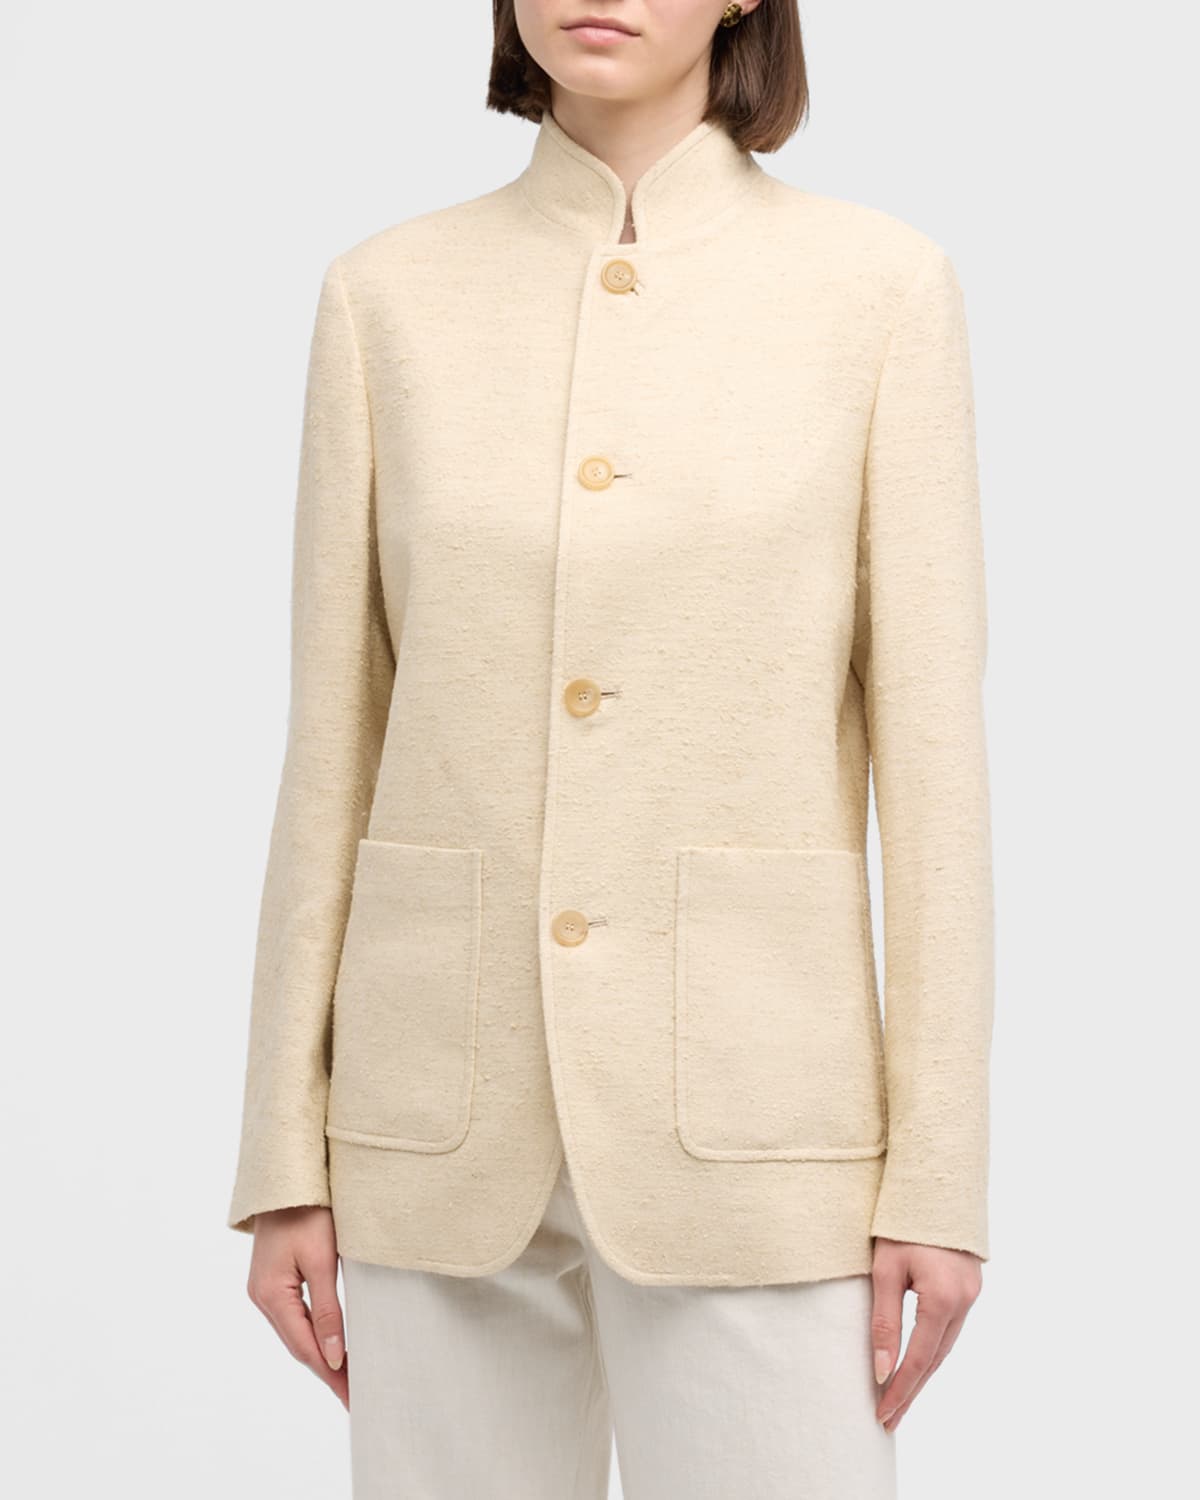 Iconic Spagna Wool Silk Single-Breasted Jacket